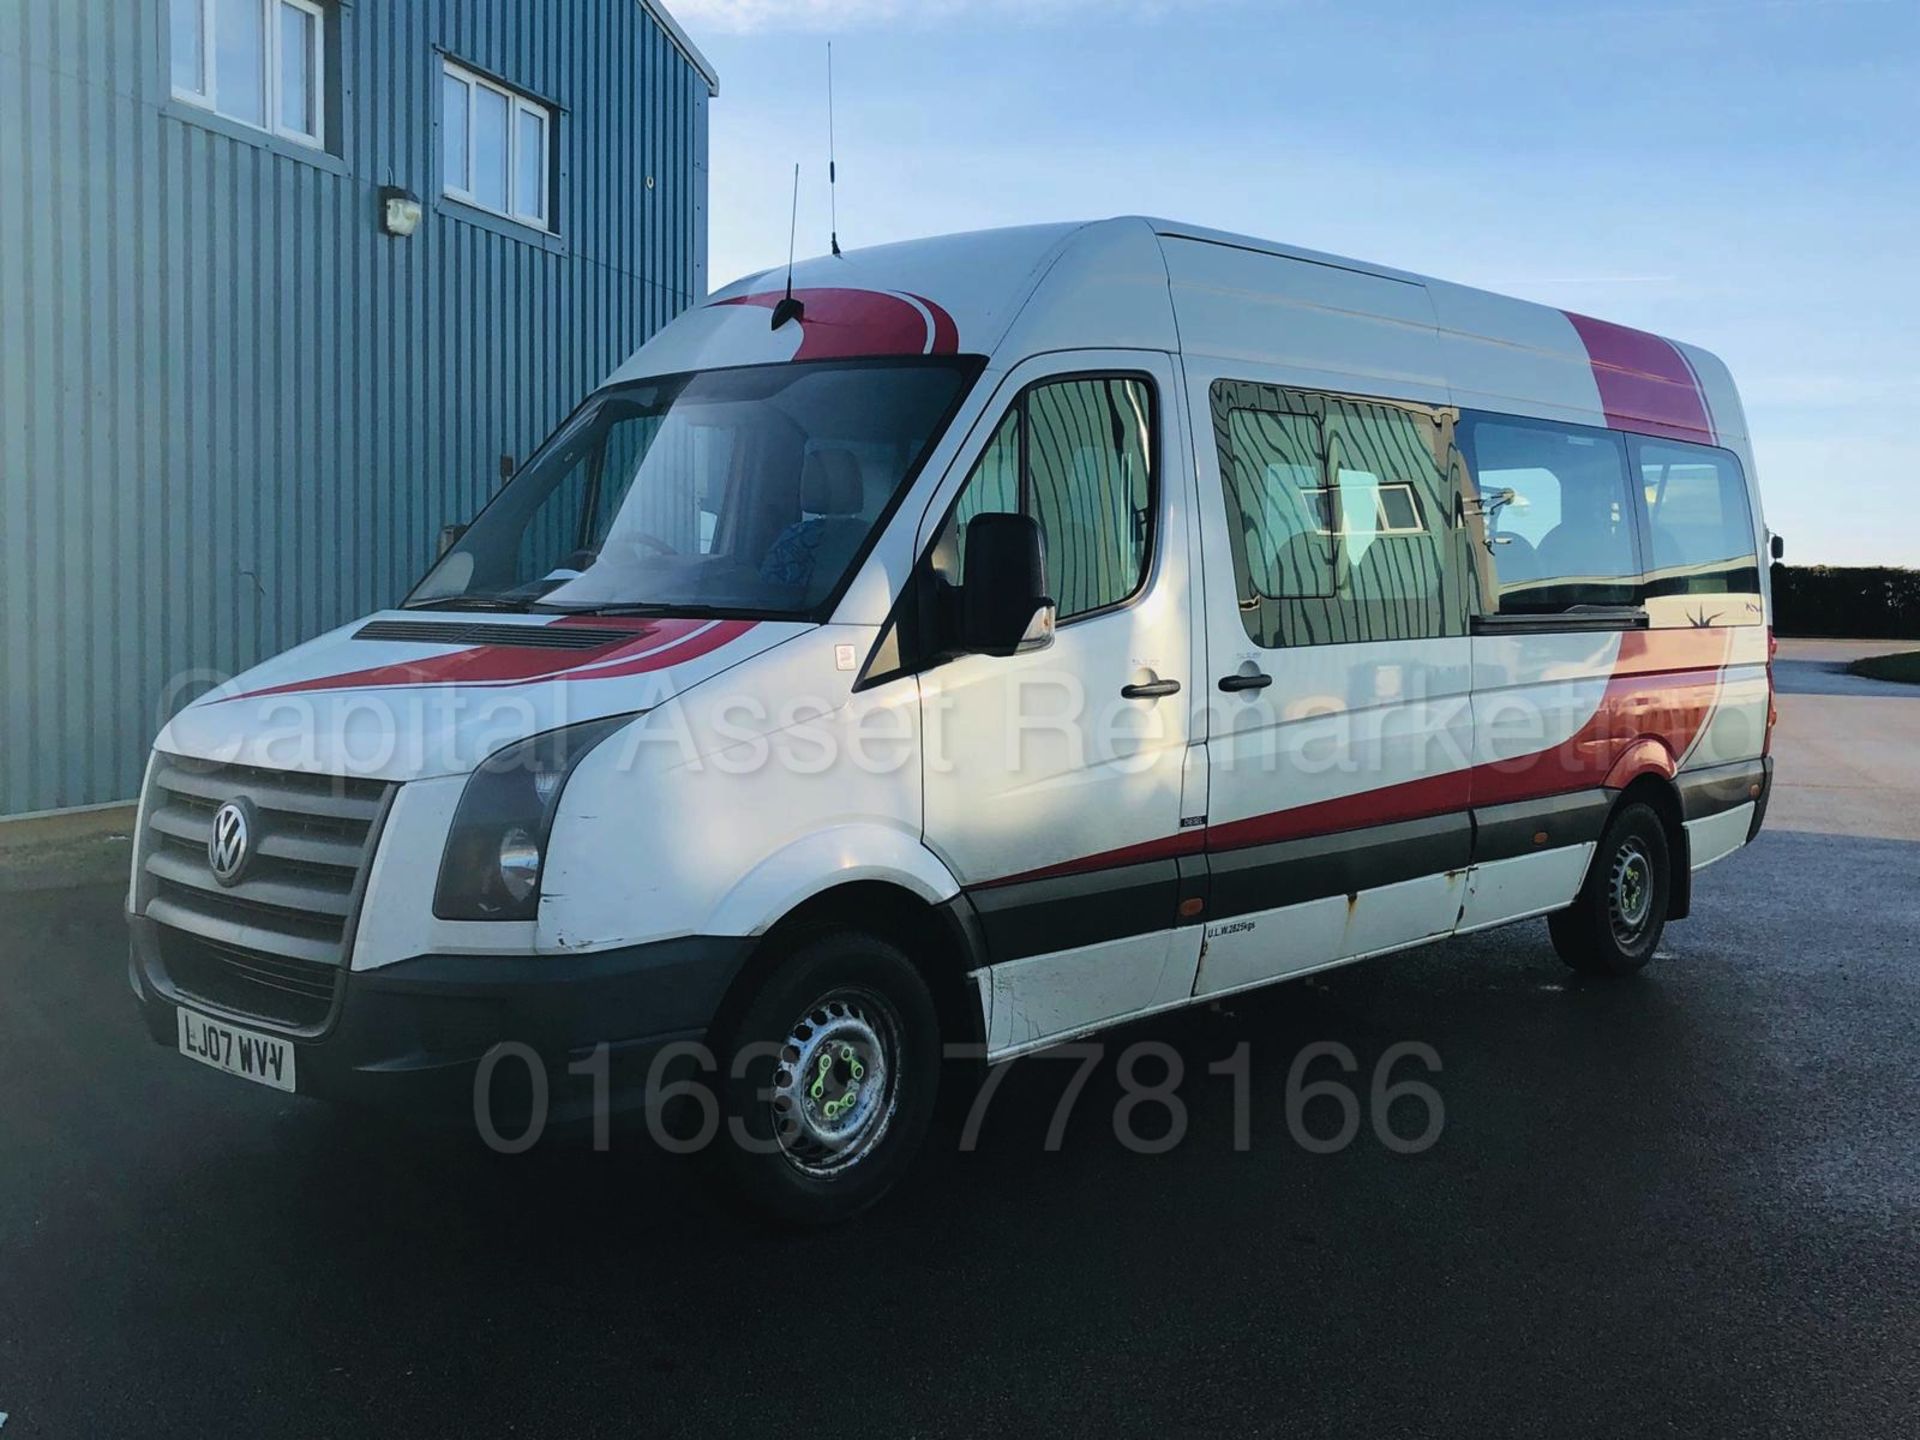 (On Sale) VOLKSWAGEN CRAFTER 2.5 TDI *LWB - 16 SEATER MINI-BUS* (2007) *ELECTRIC WHEEL CHAIR LIFT*